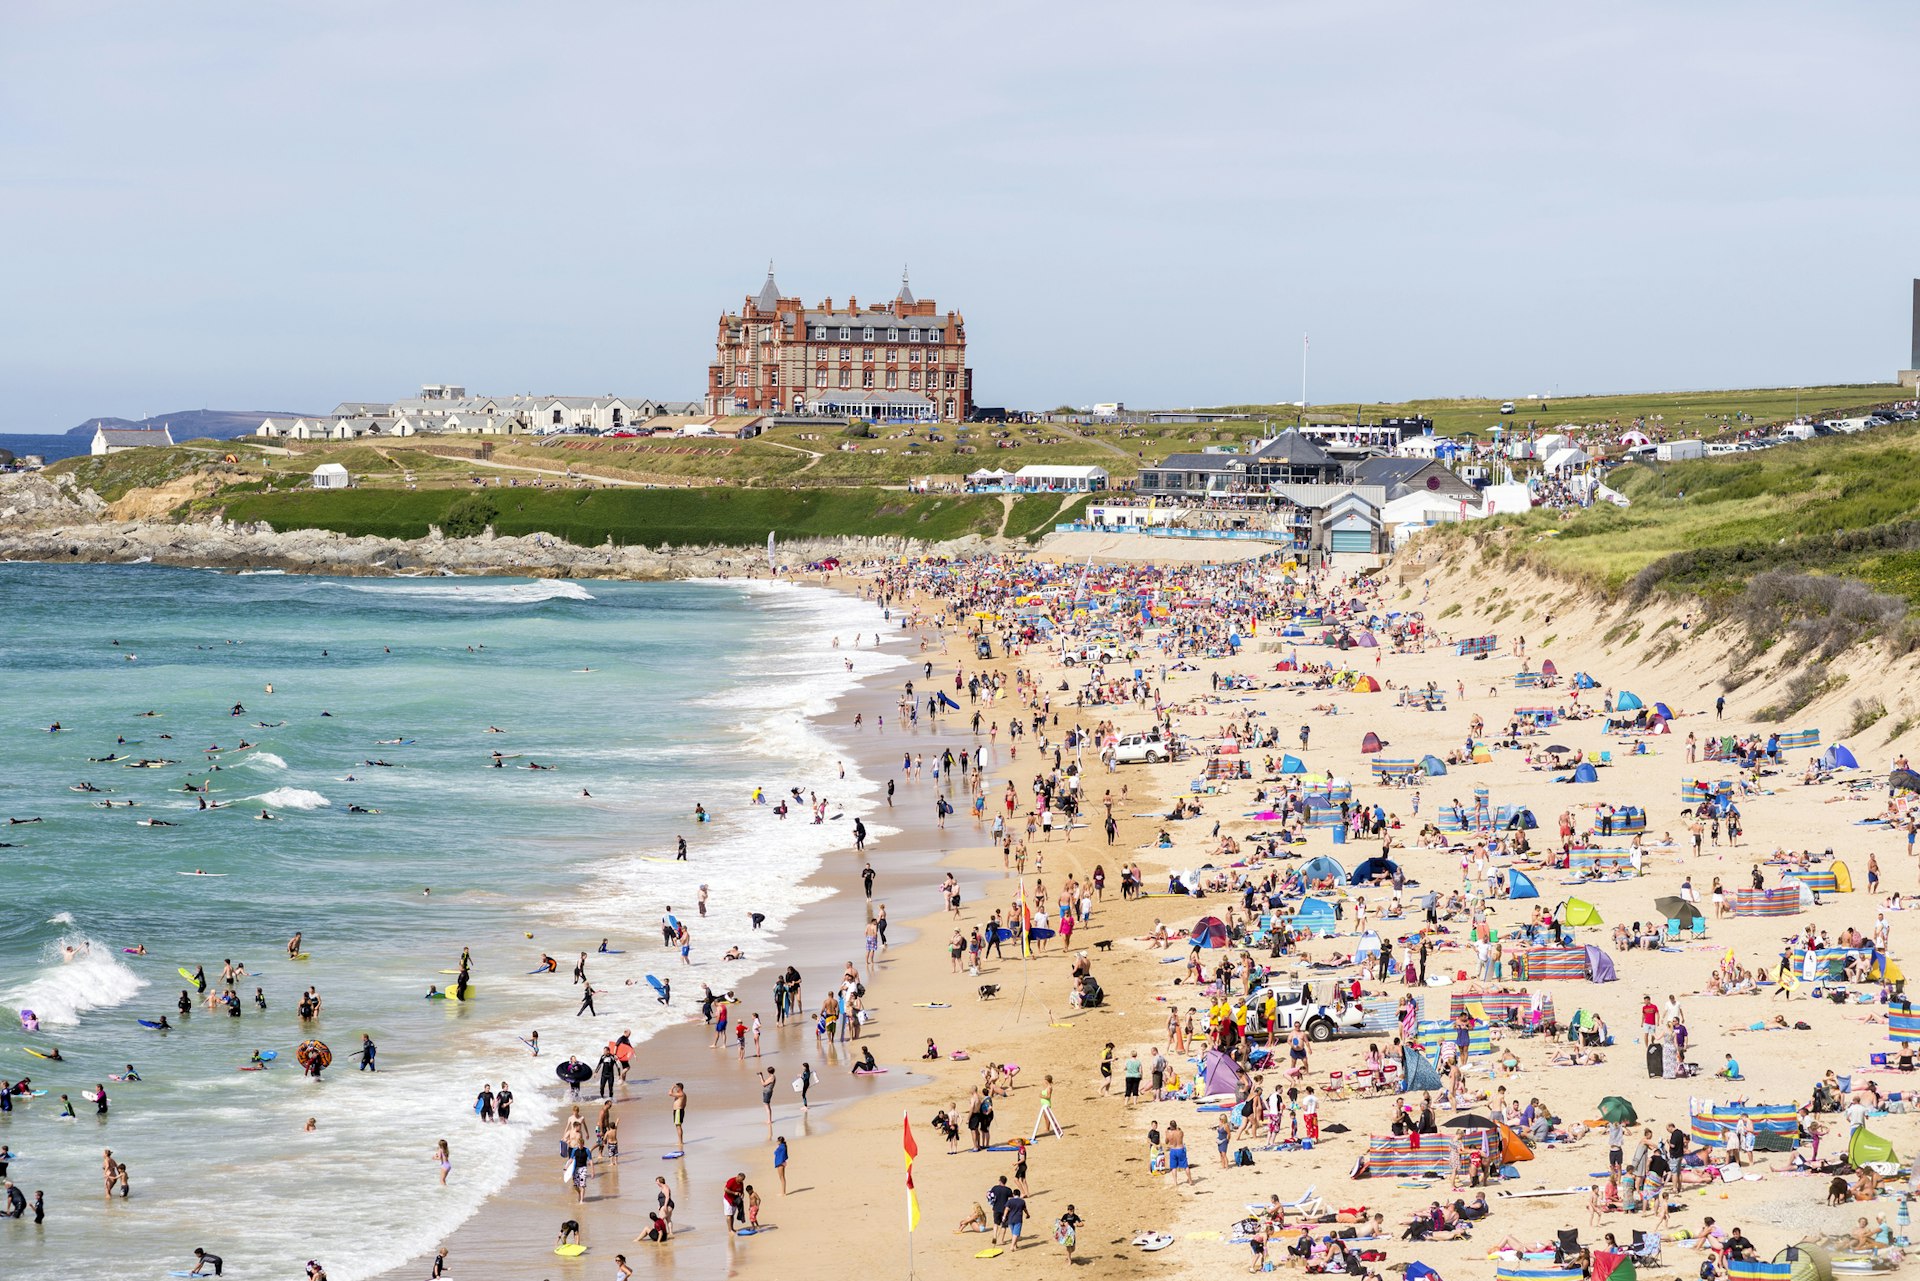 Sunbathers and surfers enjoy the beach during a sunny summer's day in Cornwall.